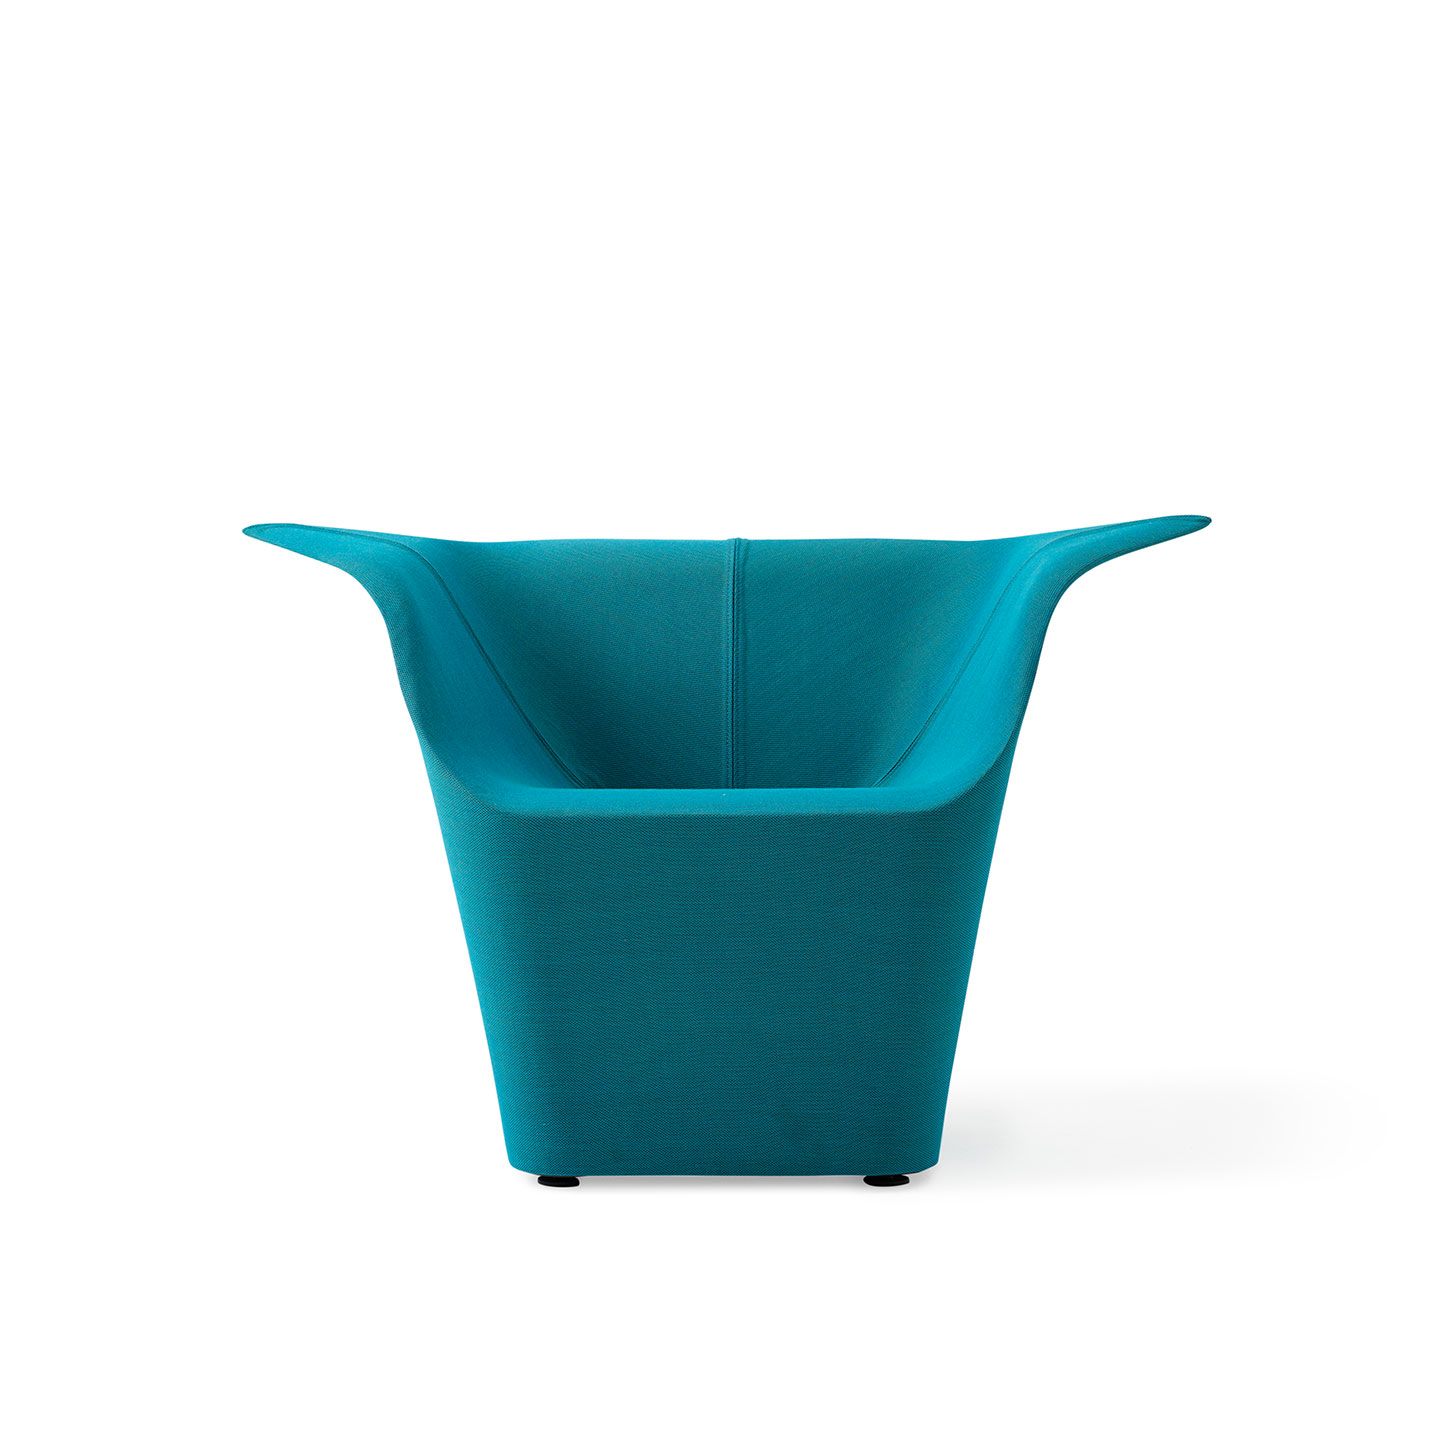 Haworth Garment lounge chair in teal color front view